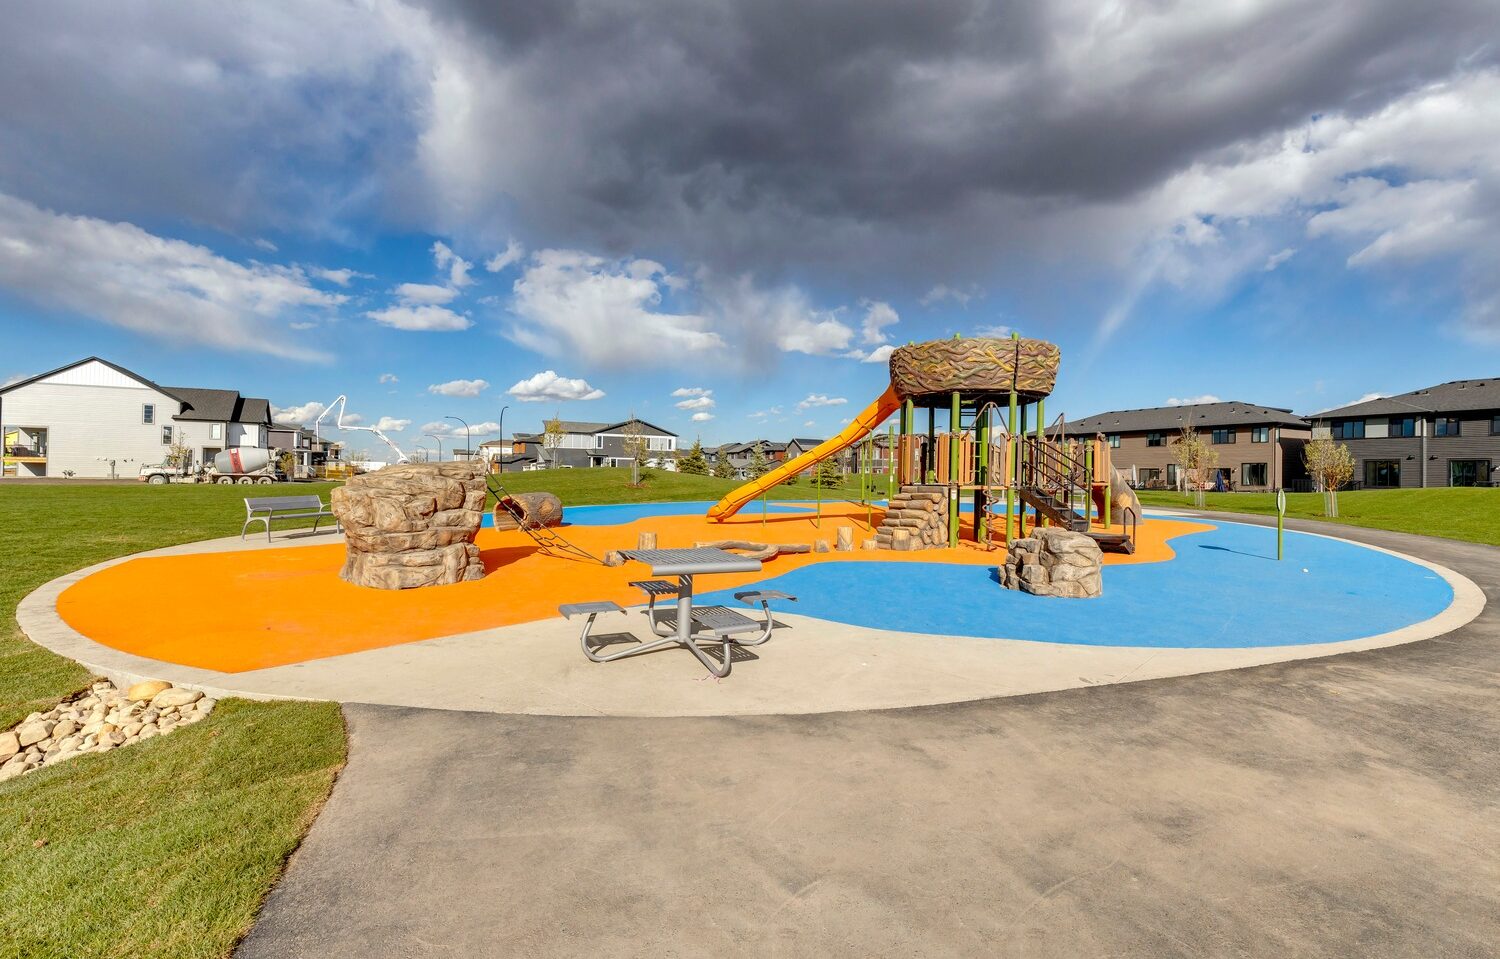 The Osprey Park playground with birds' nest and slide features.